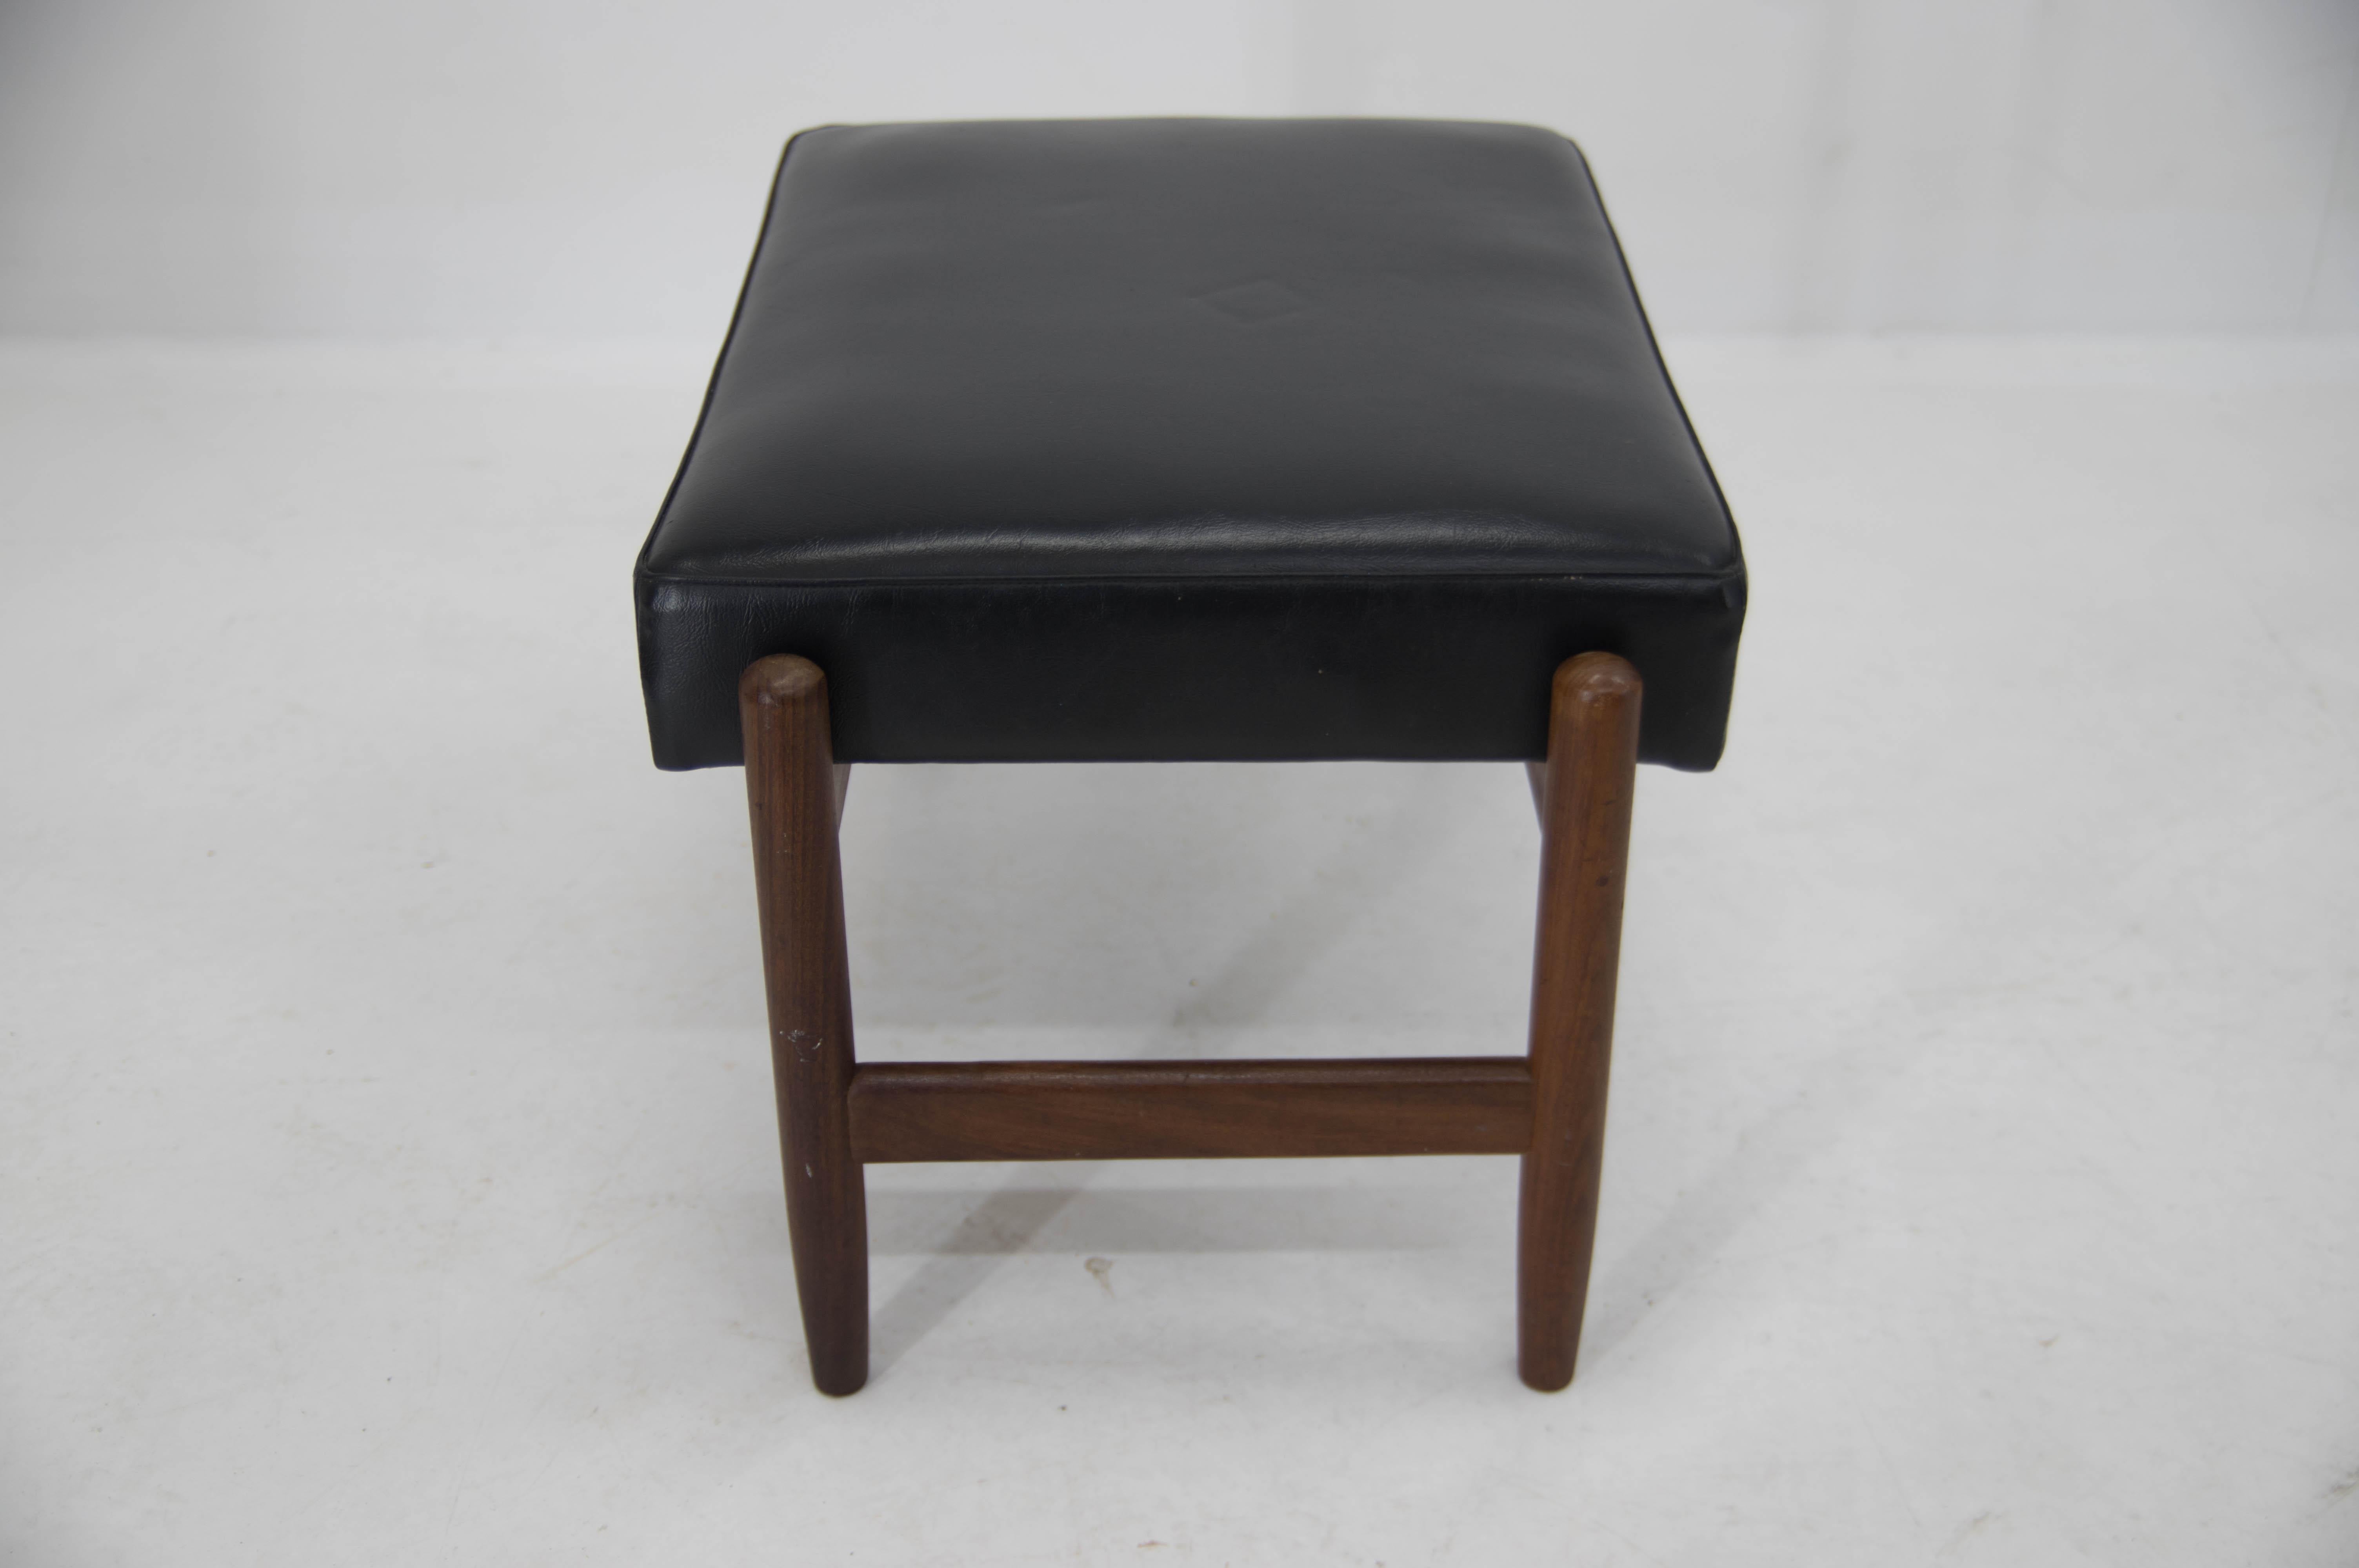 Danish Footrest or Stool in Teak and Black Leather, Denmark, 1960s